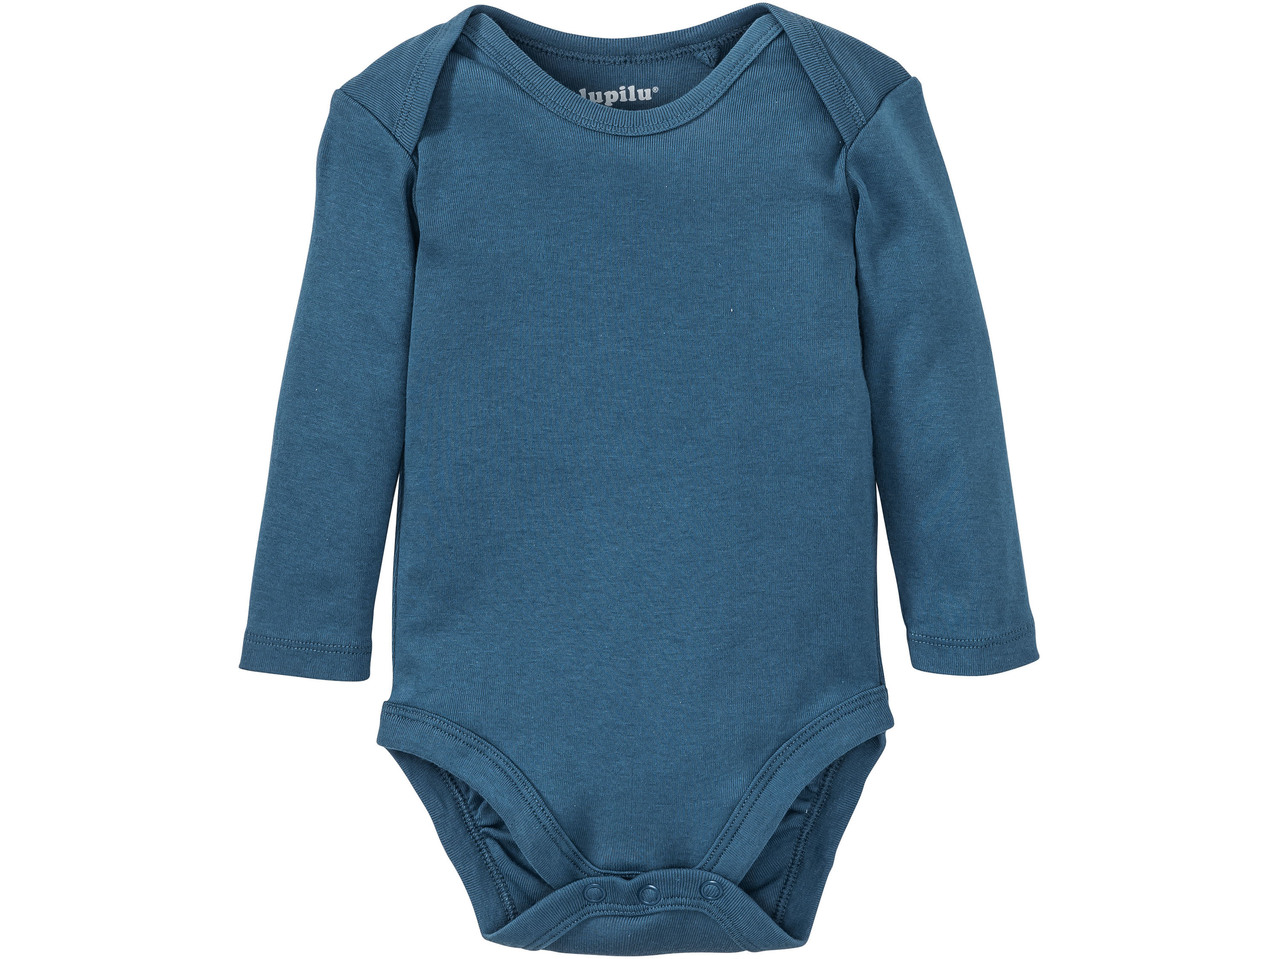 Long-Sleeved Baby Bodysuits, 2 pieces